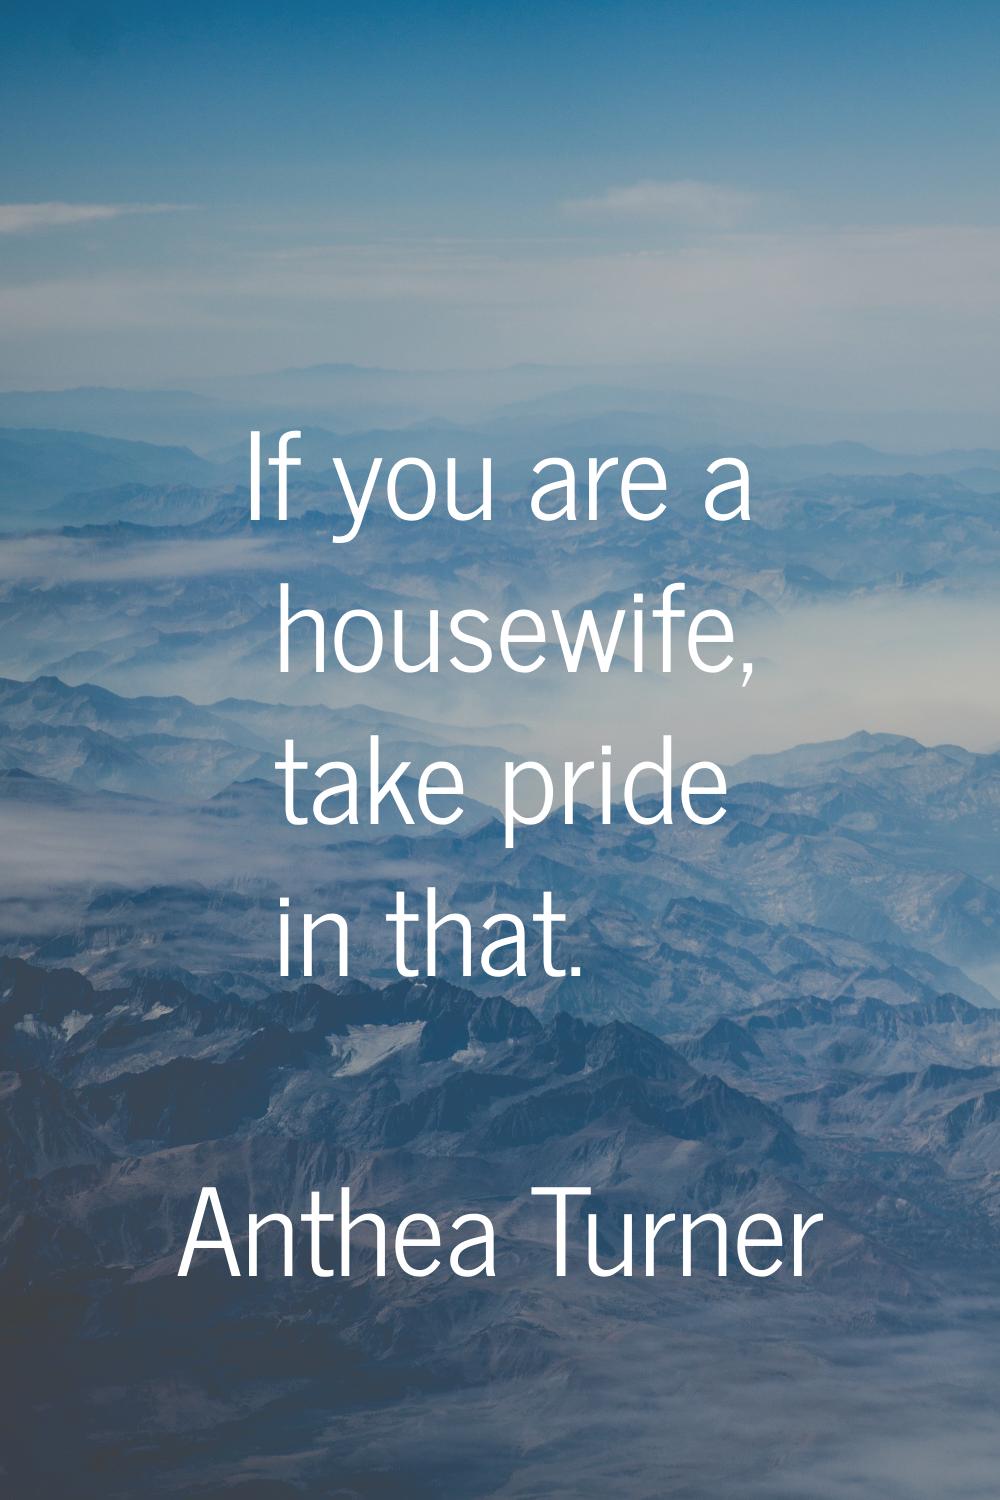 If you are a housewife, take pride in that.